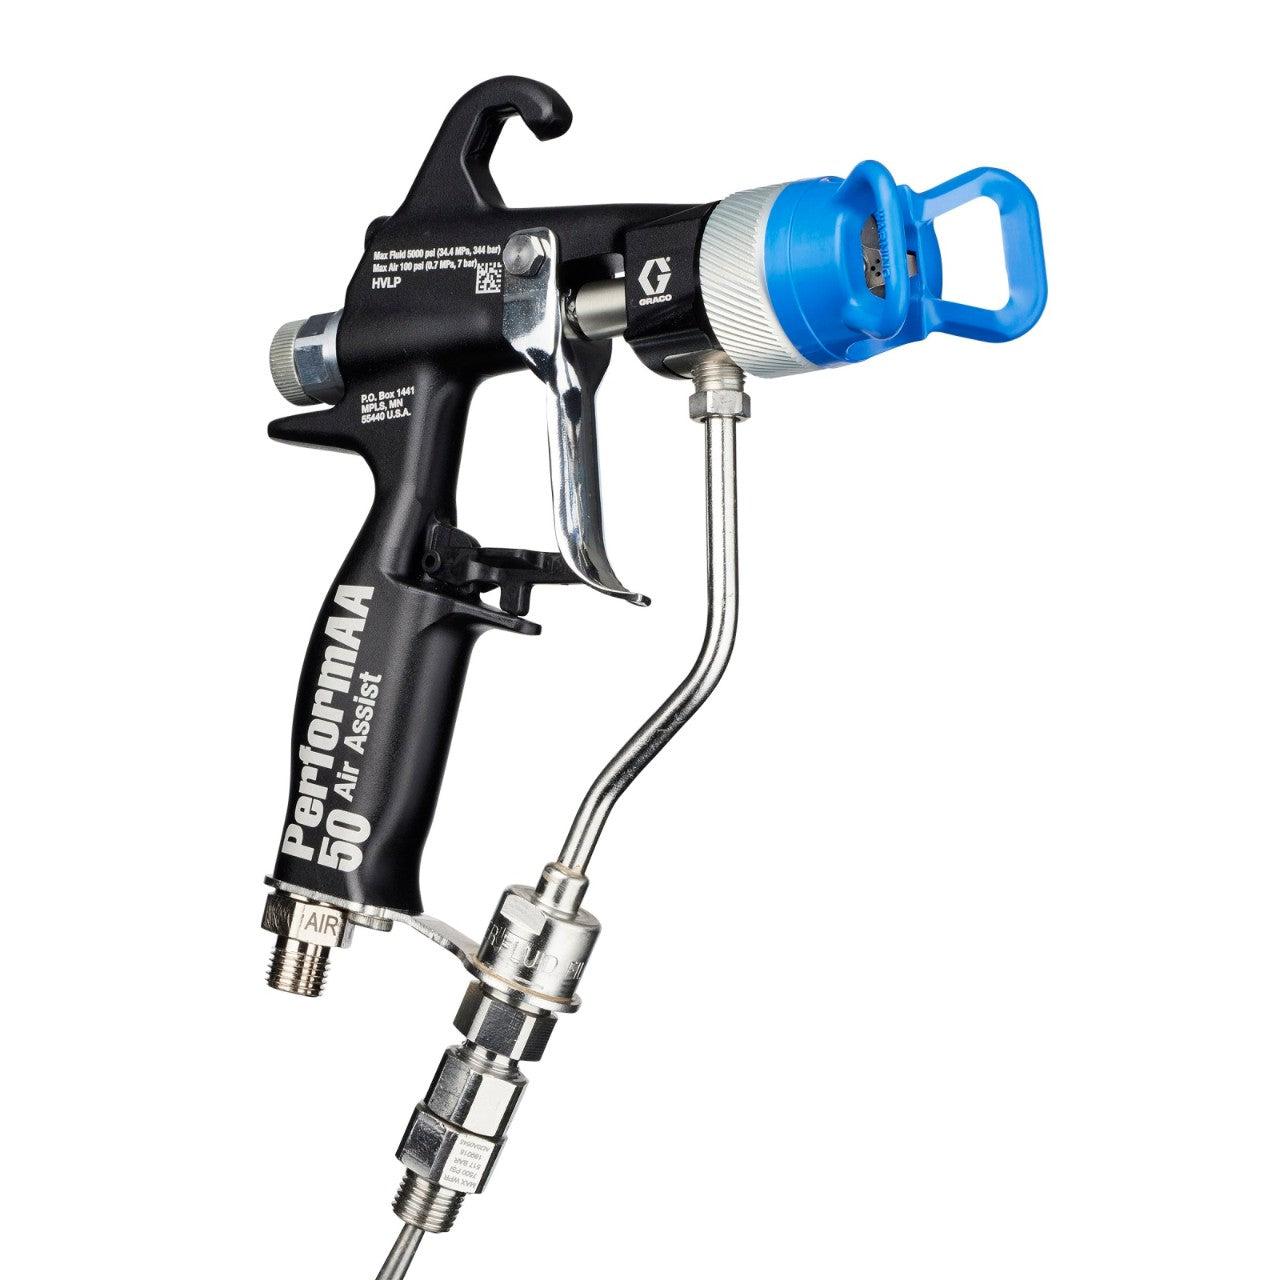 PerformAA 5000 Air Assist Gun with Quick Drying air cap and fluid swivel